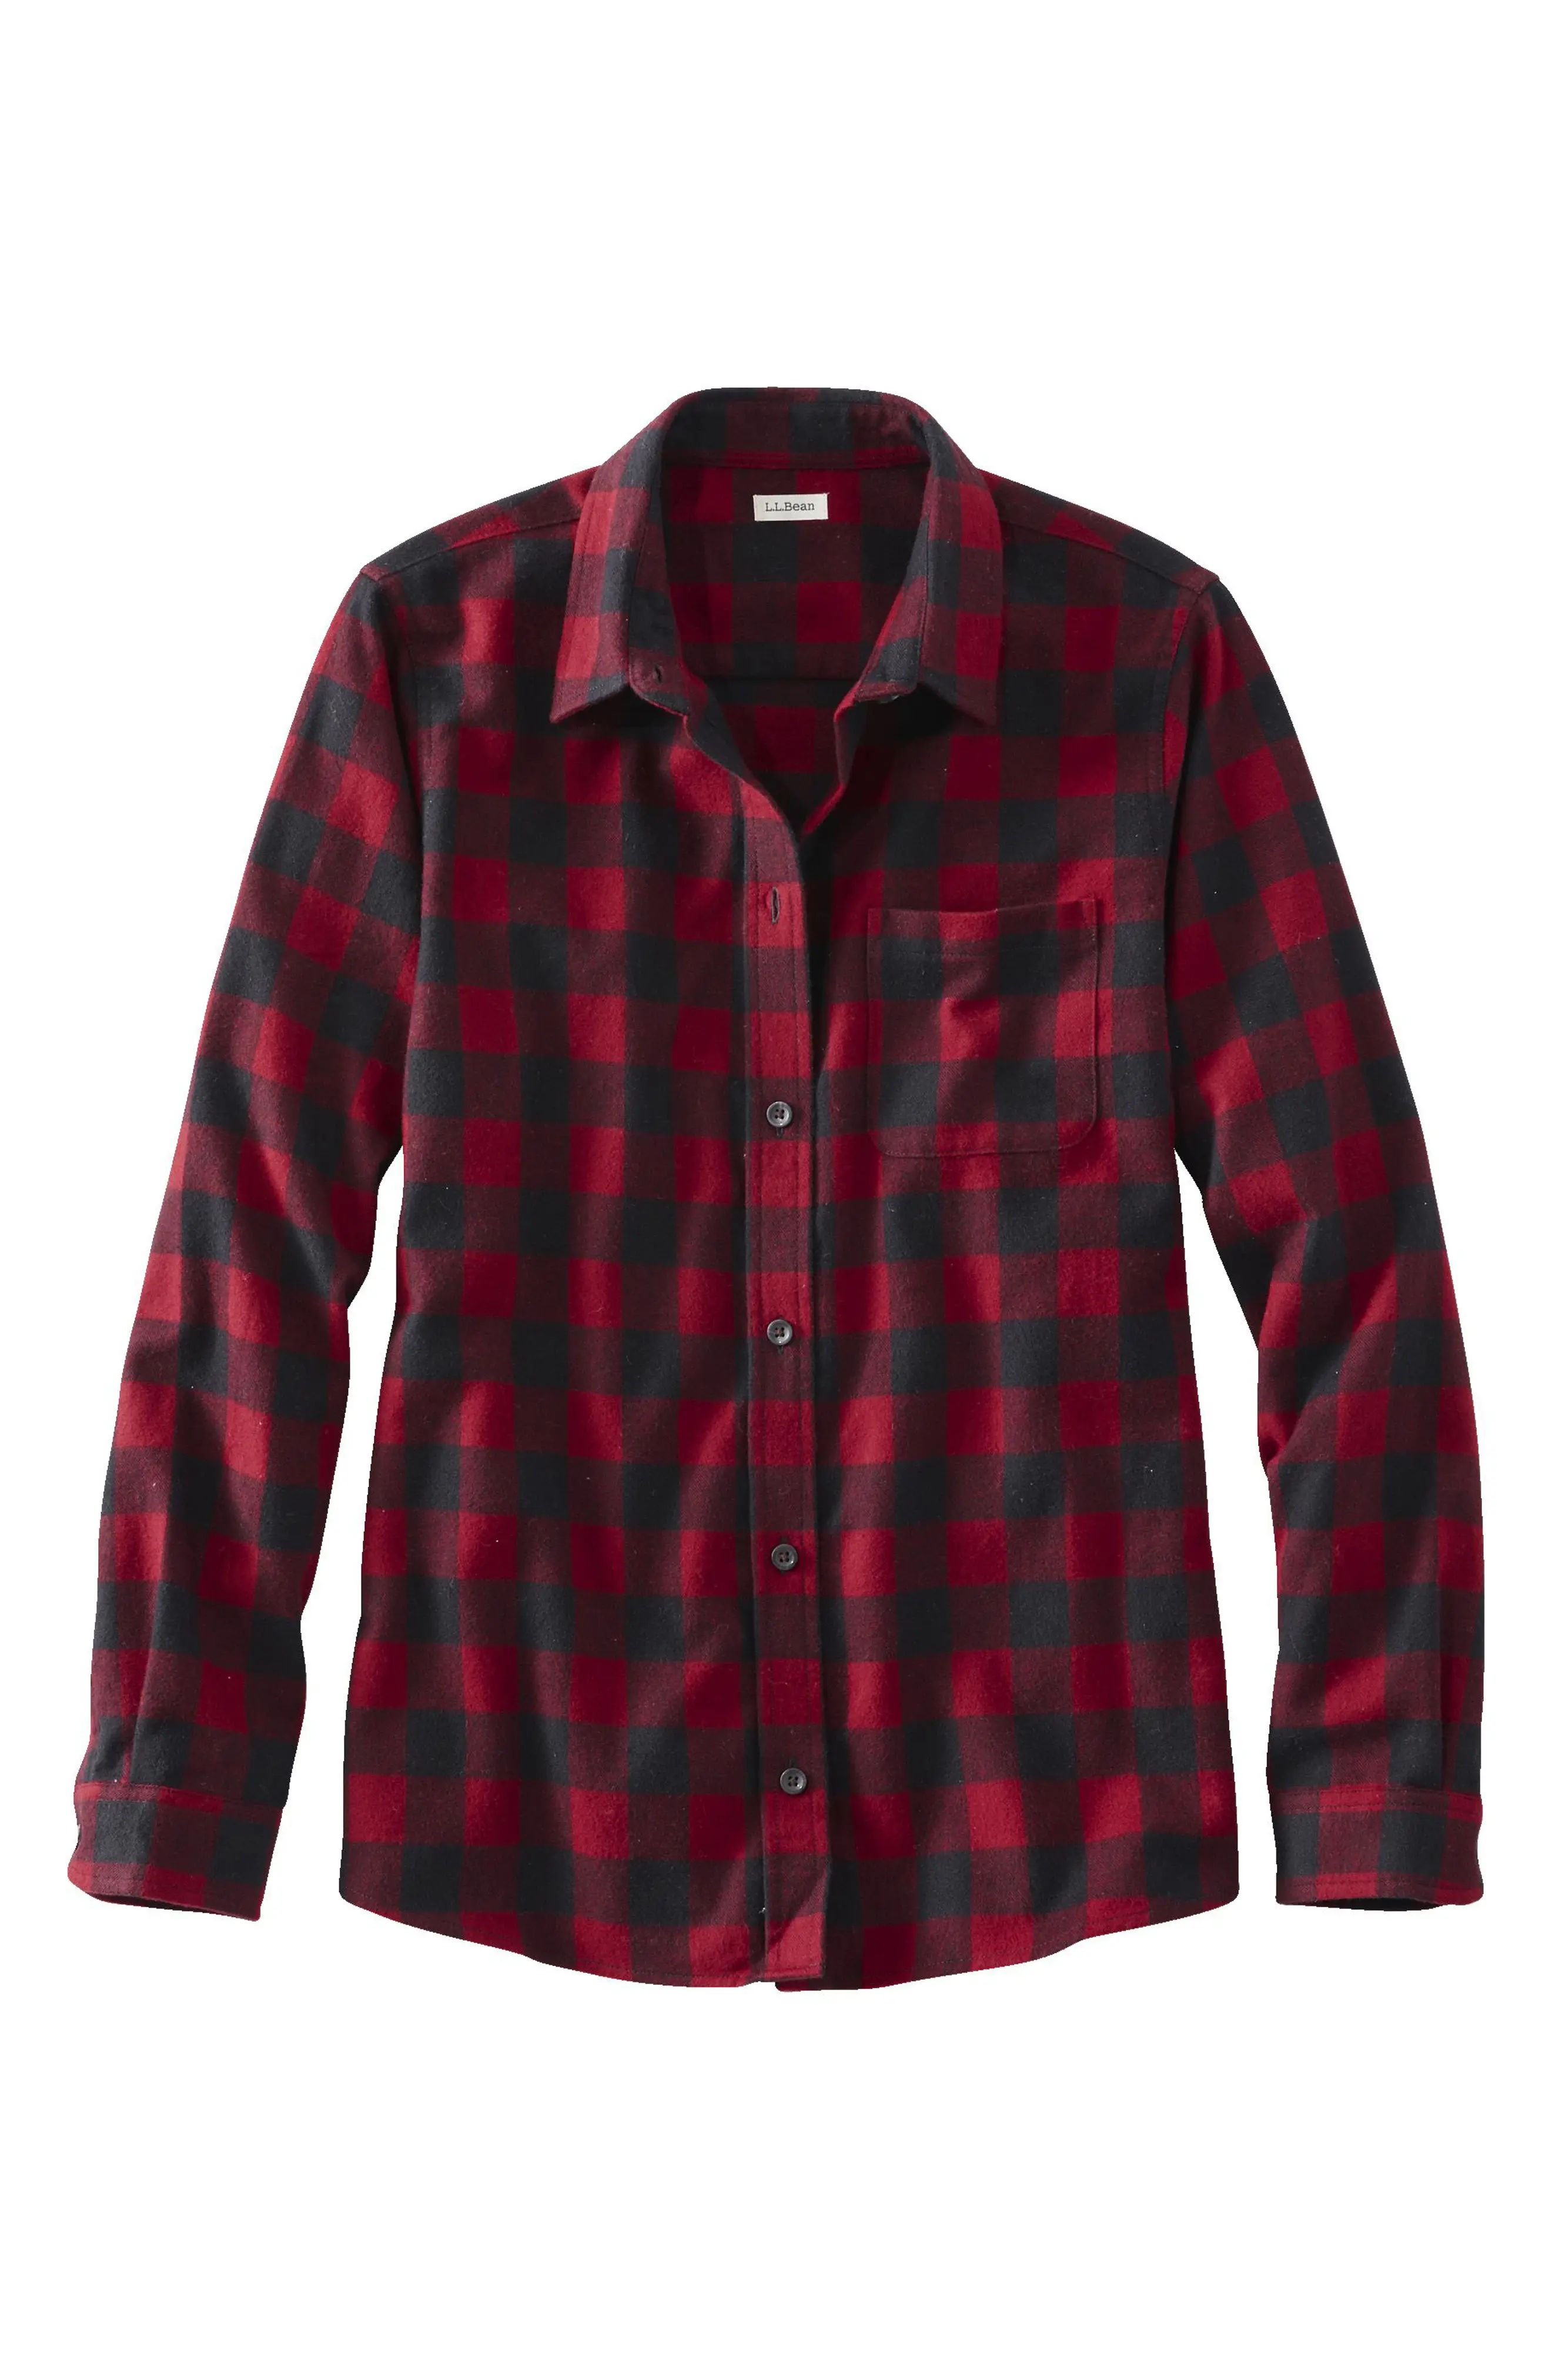 L.L.Bean Scotch Plaid Women's Flannel Shirt, Size X-Large in Rob Roy at Nordstrom | Nordstrom